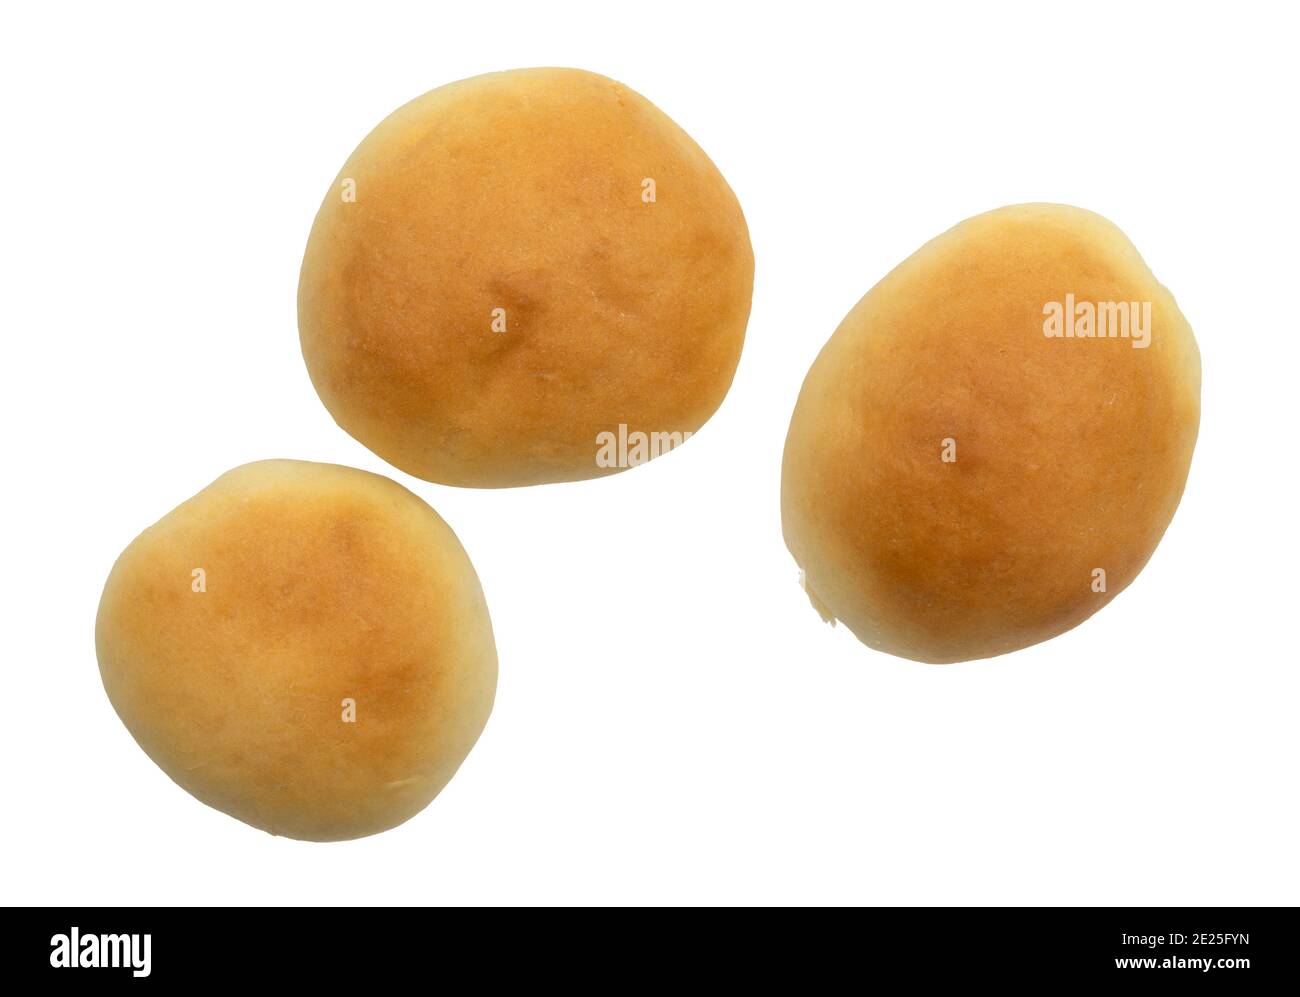 Top view of three fresh homemade yeast rolls isolated on a white background. Stock Photo